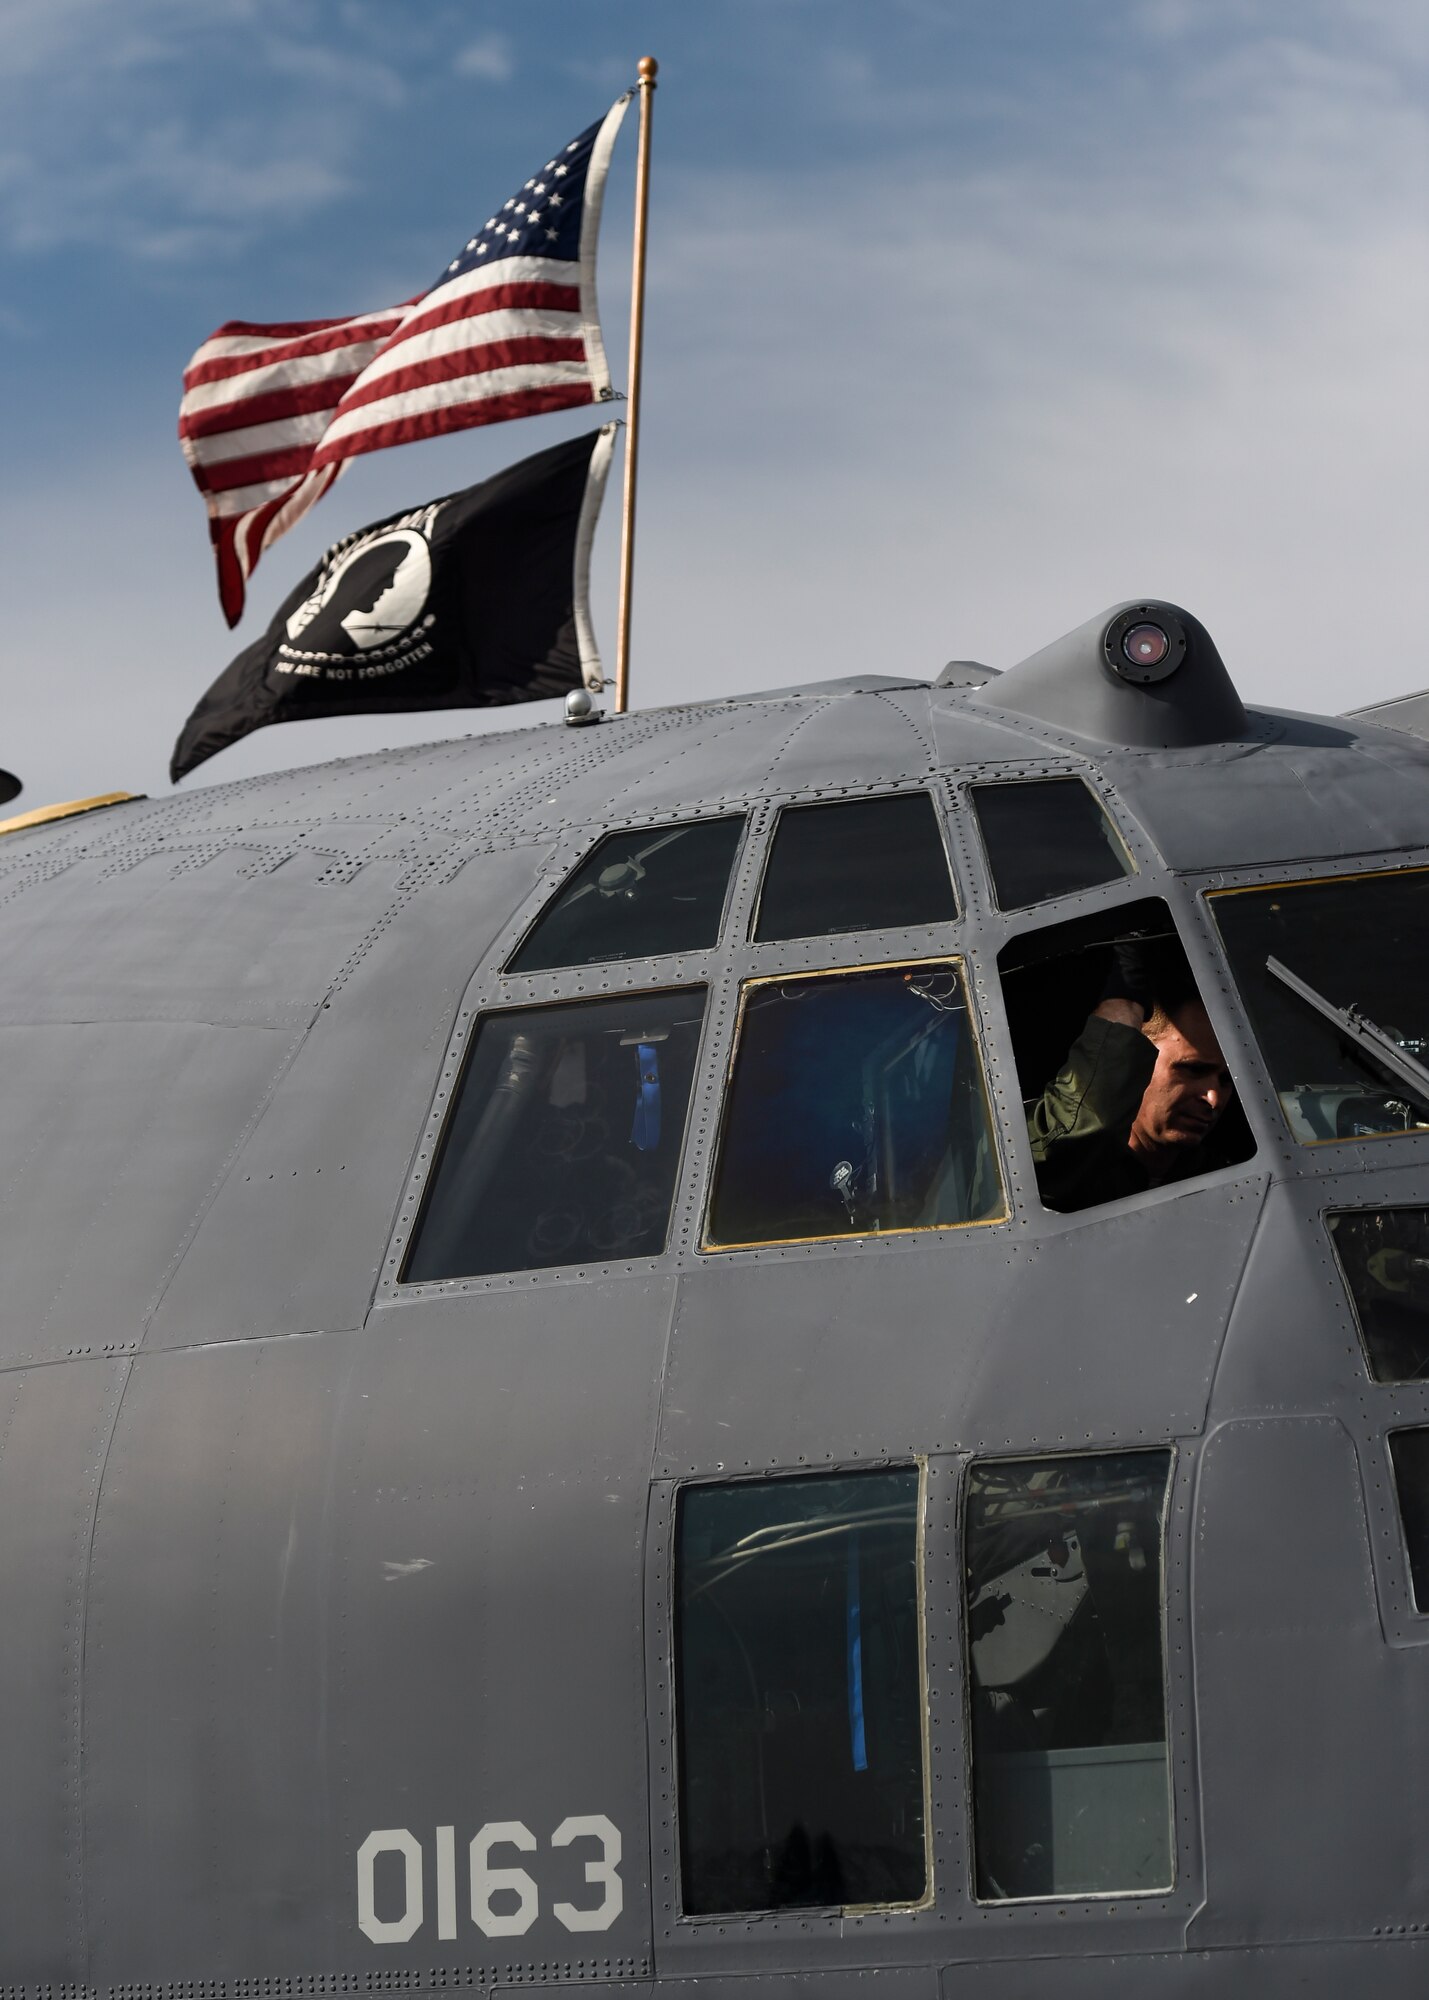 Master Sgt. Sawn Kegley, 19th Special Operations Squadron flight engineer, runs a preflight check during the first AC-130U Spooky retirement at Hurlburt Field, Fla., Sept. 21, 2015. On July 21, 2011, “Bad Omen” had one of its most successful sorties over Afghanistan. The aircraft arrived on station to support a task force that was infiltrating a compound area when the task force started taking fire from all sides. The gunship began to take direct action, and true to “U” model form, the crew performed eight separate engagements using infrared and TV dual-target attacks firing 146, 40mm cannon rounds and 41, 105mm howitzer rounds to end the engagement. (U.S. Air Force photo by Airman Kai White)